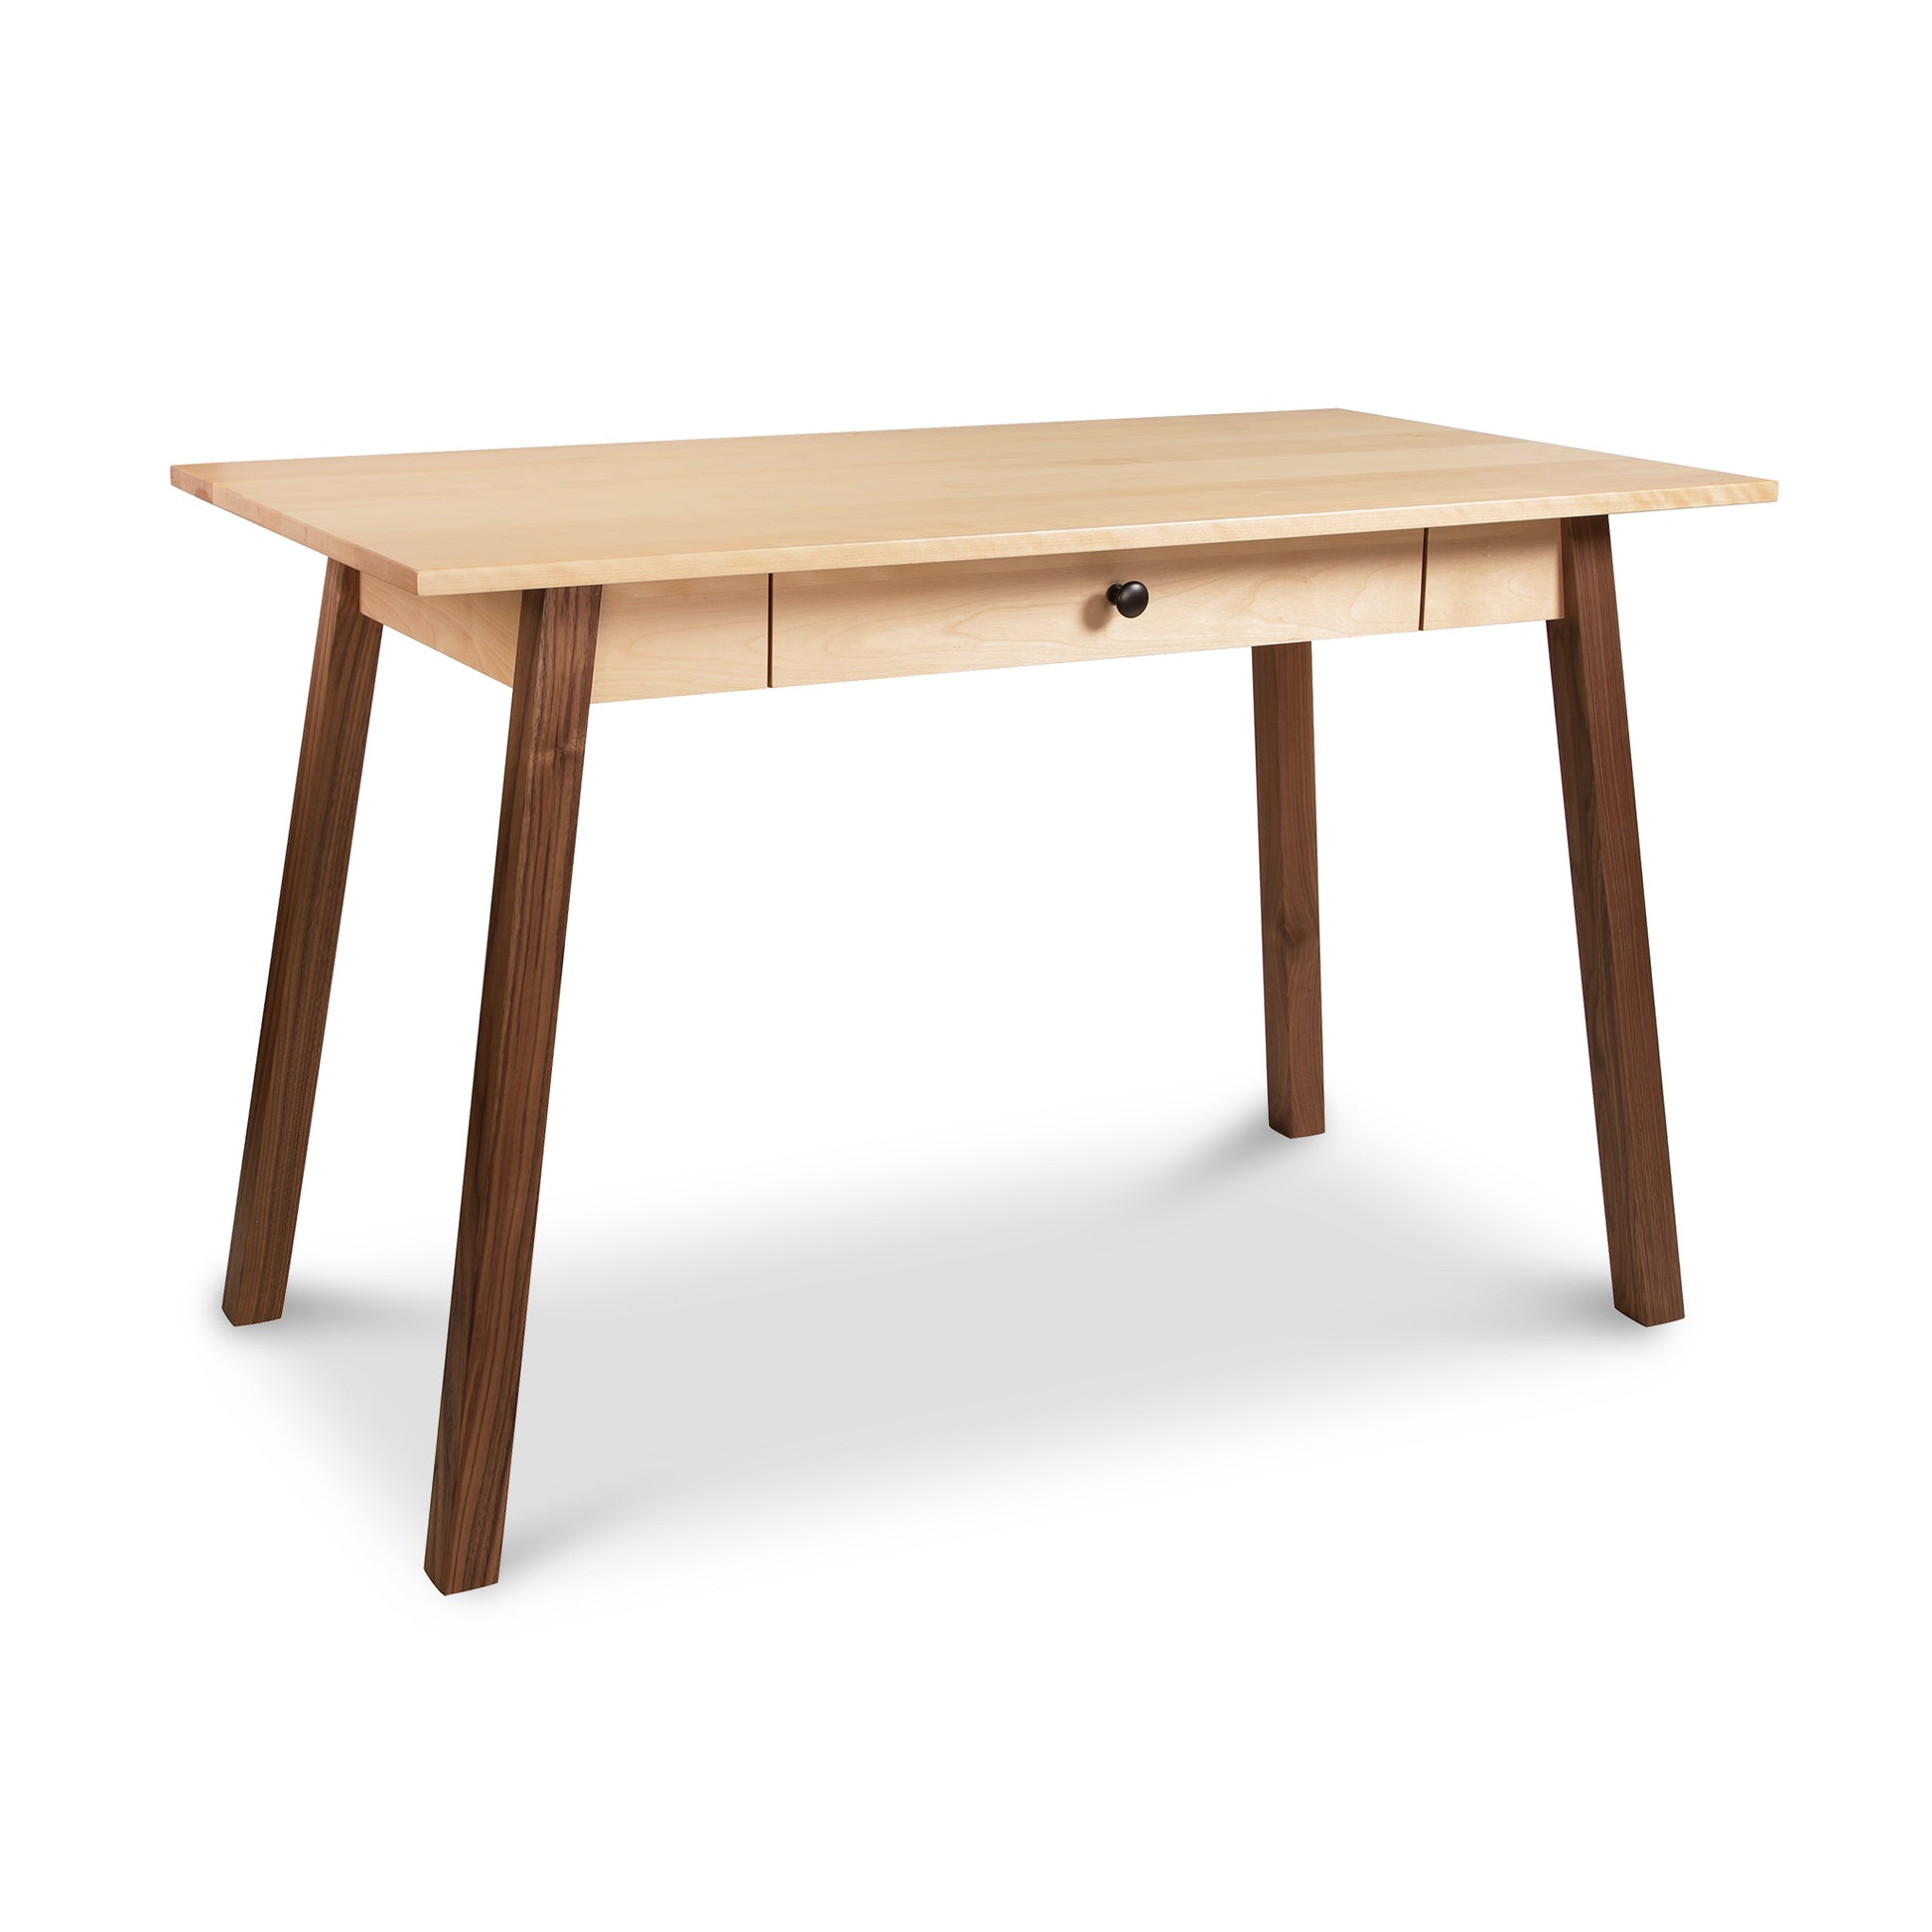 A sustainable Manchester Two-Tone Writing Desk from Vermont Woods Studios with a natural finish featuring a single centered drawer and angled legs, isolated on a white background.